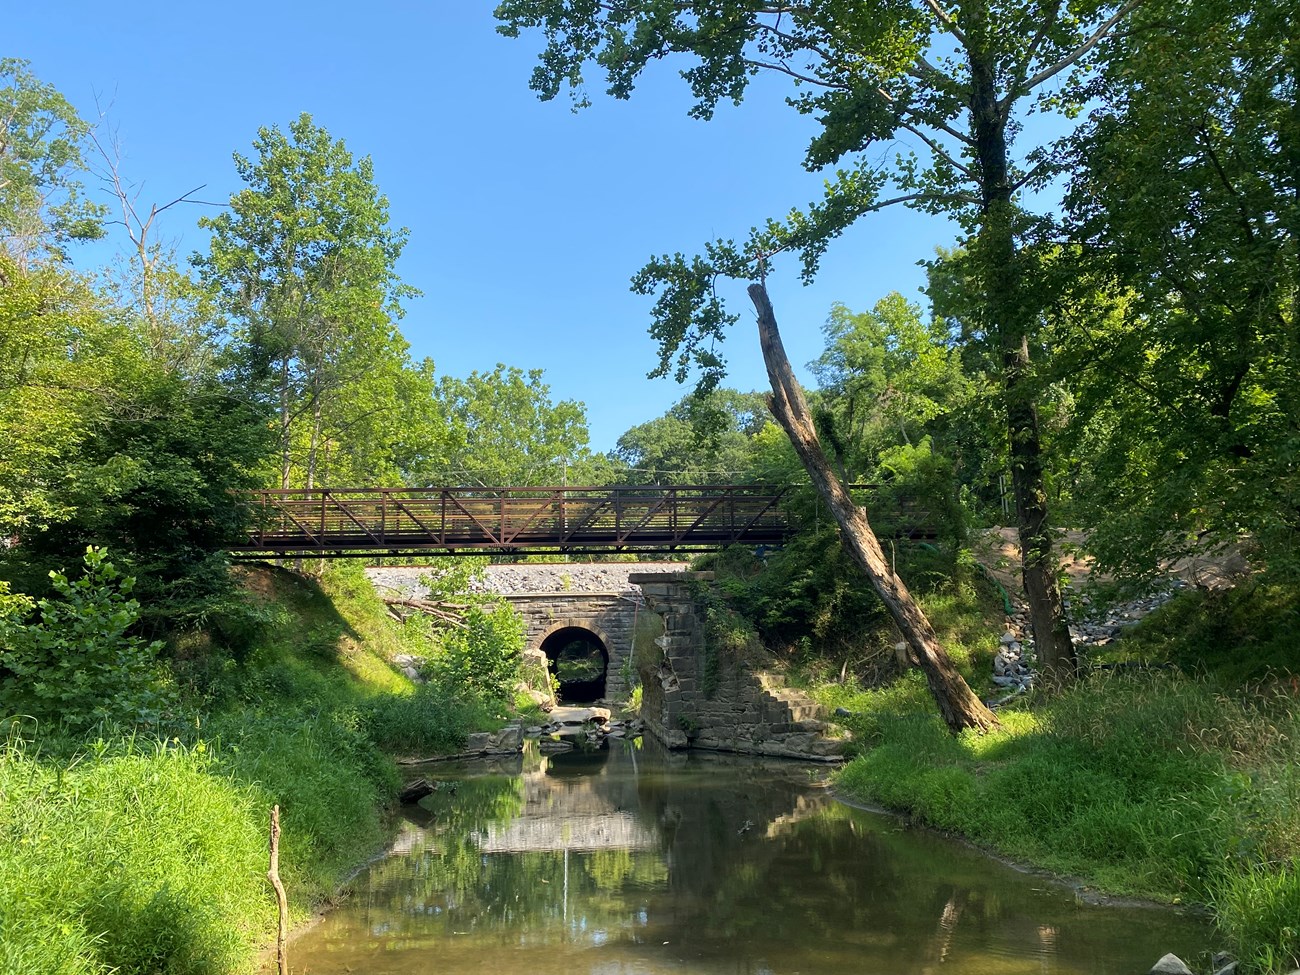 A brown metal bridge spans the towpath trail across the remnants of a masonry culvert